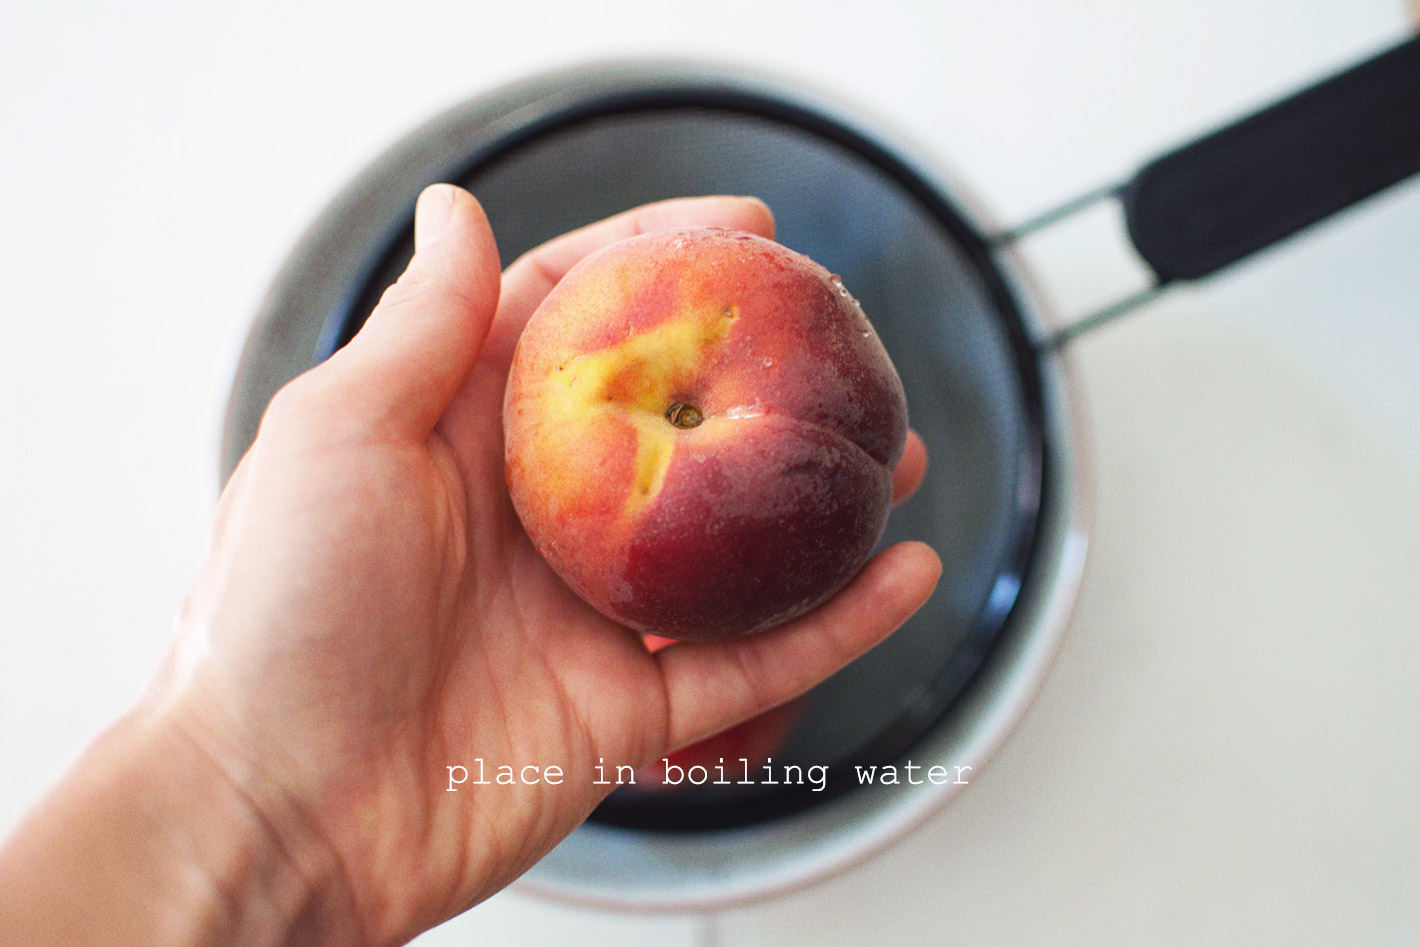 How to Peel a Peach | Wake the Wolves